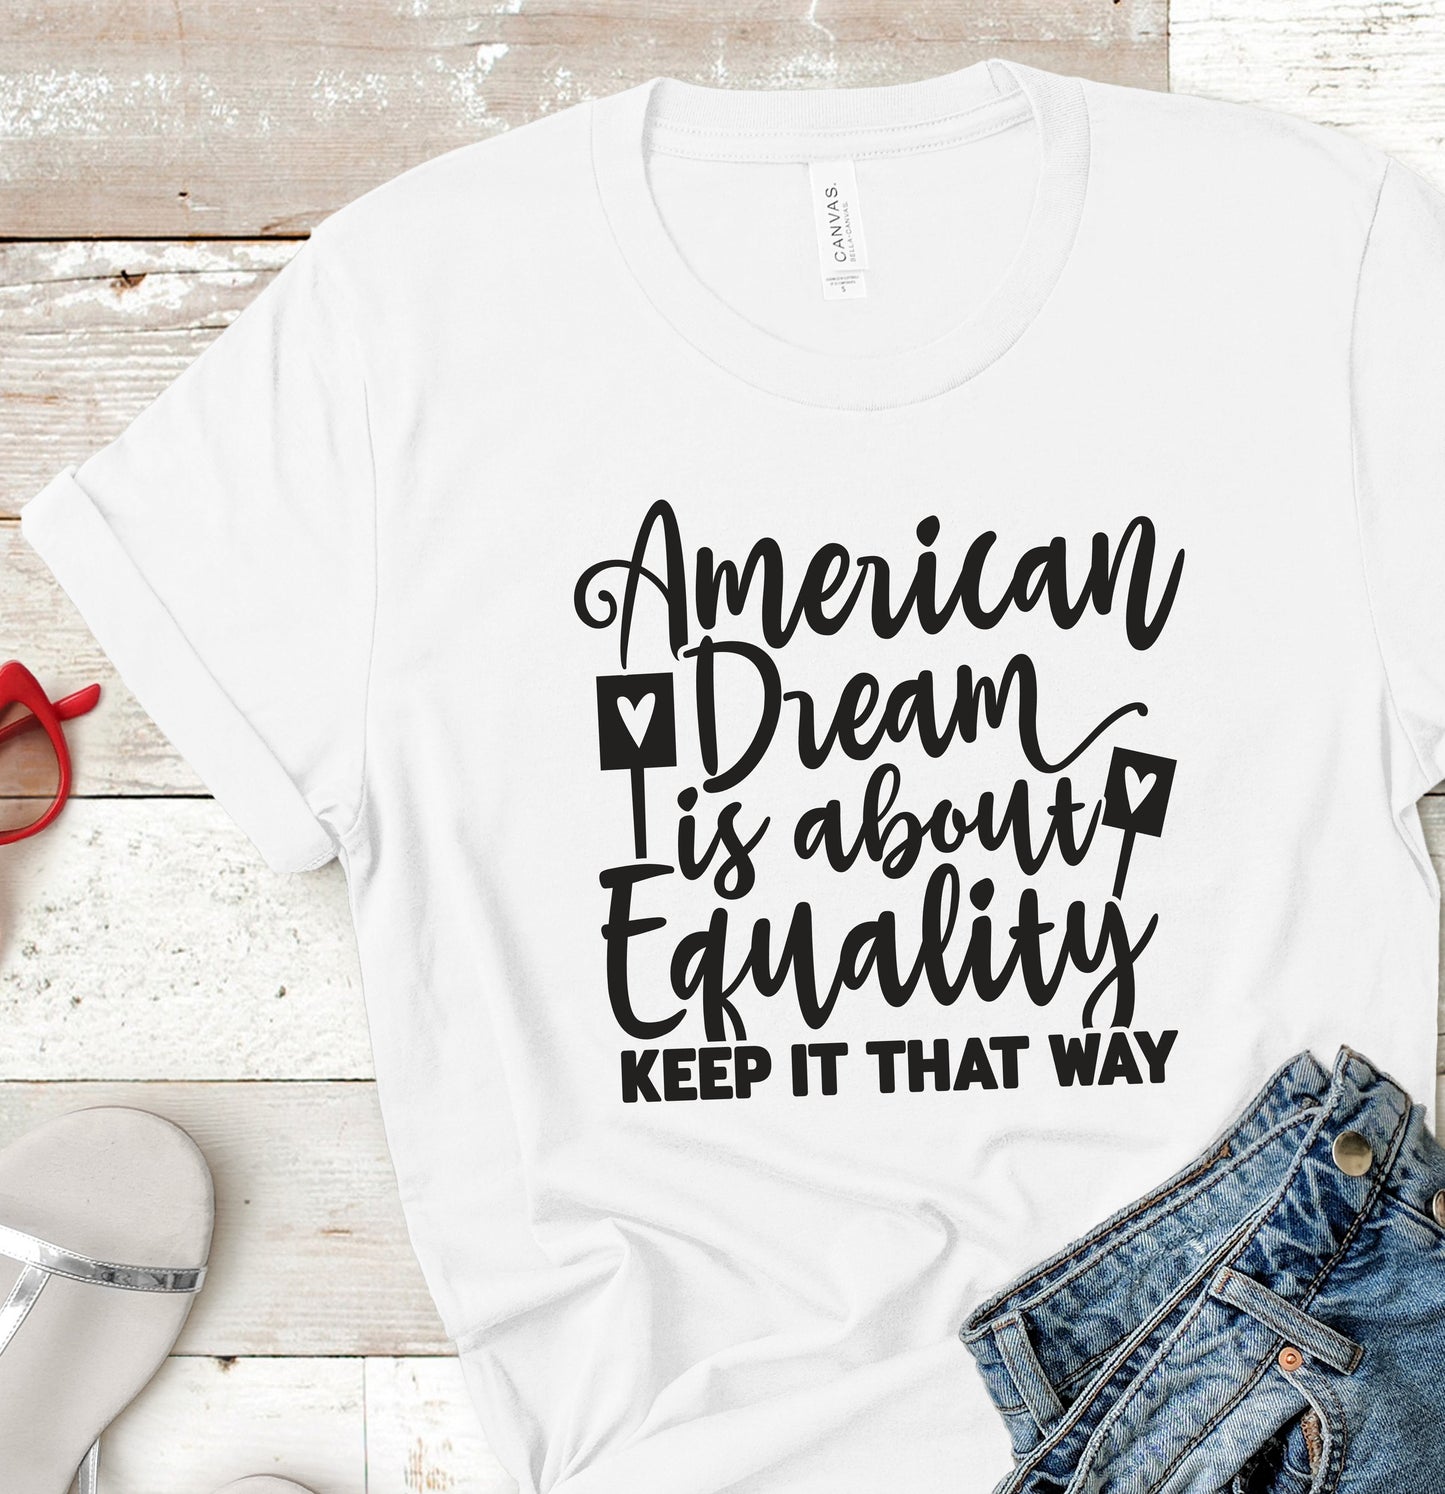 "American Dream is about Equality" Tee